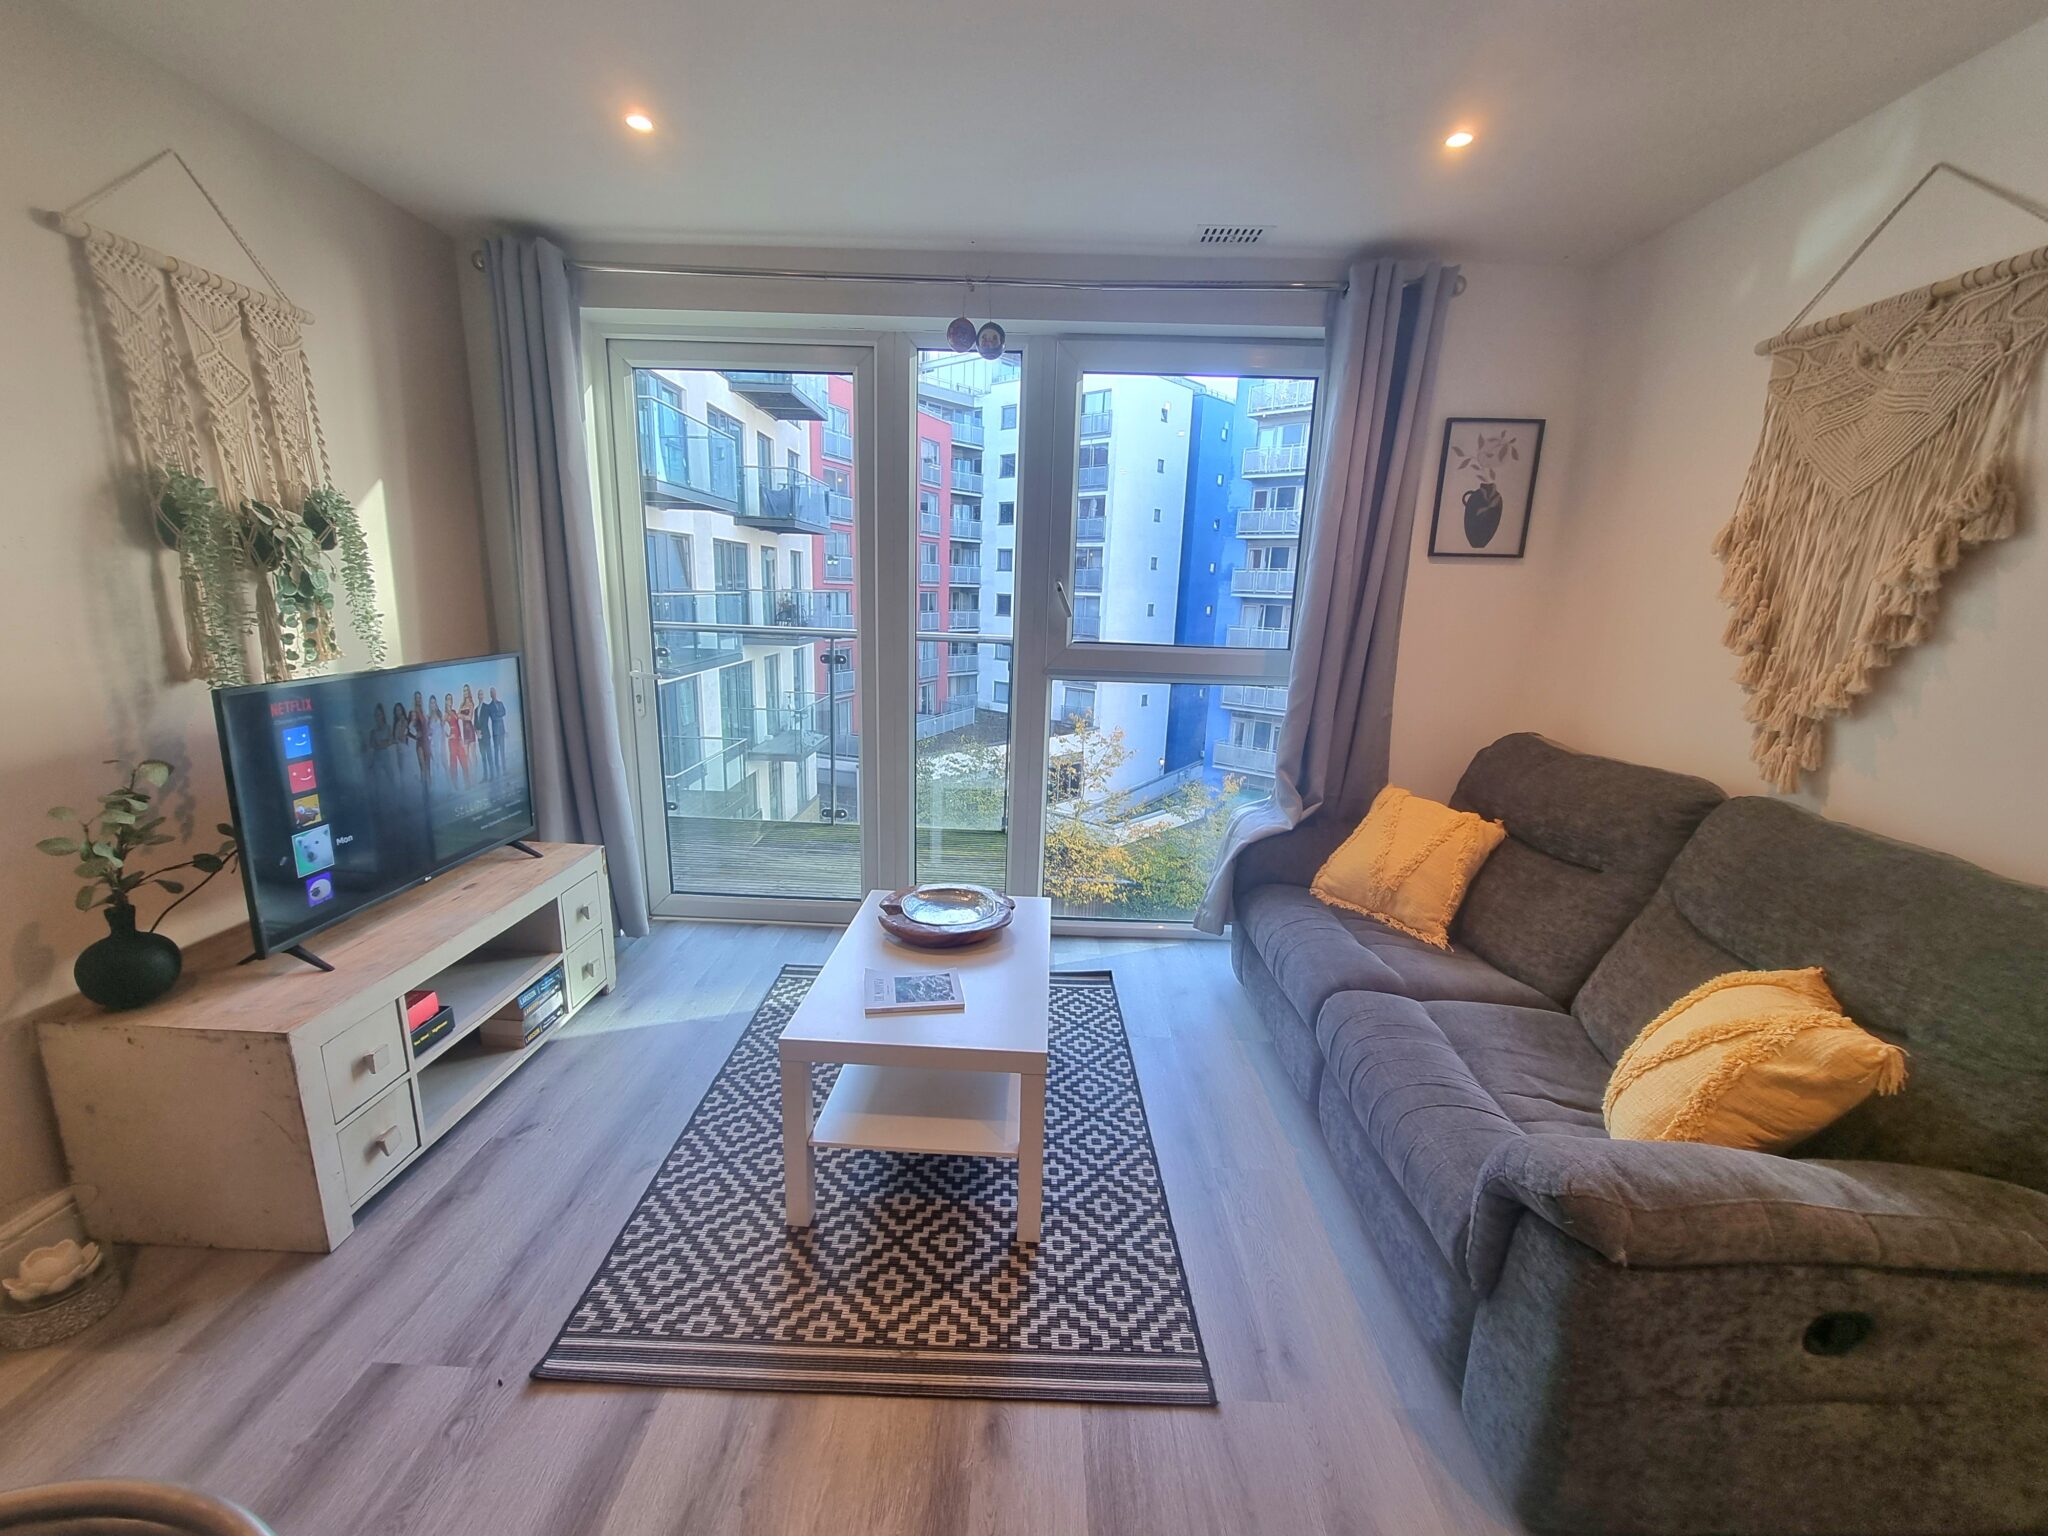 Serviced Accommodation Greenwich London with all bills included. This Serviced Apartment in South London has Lift Access, Balcony, Gym & Pool | Urban Stay